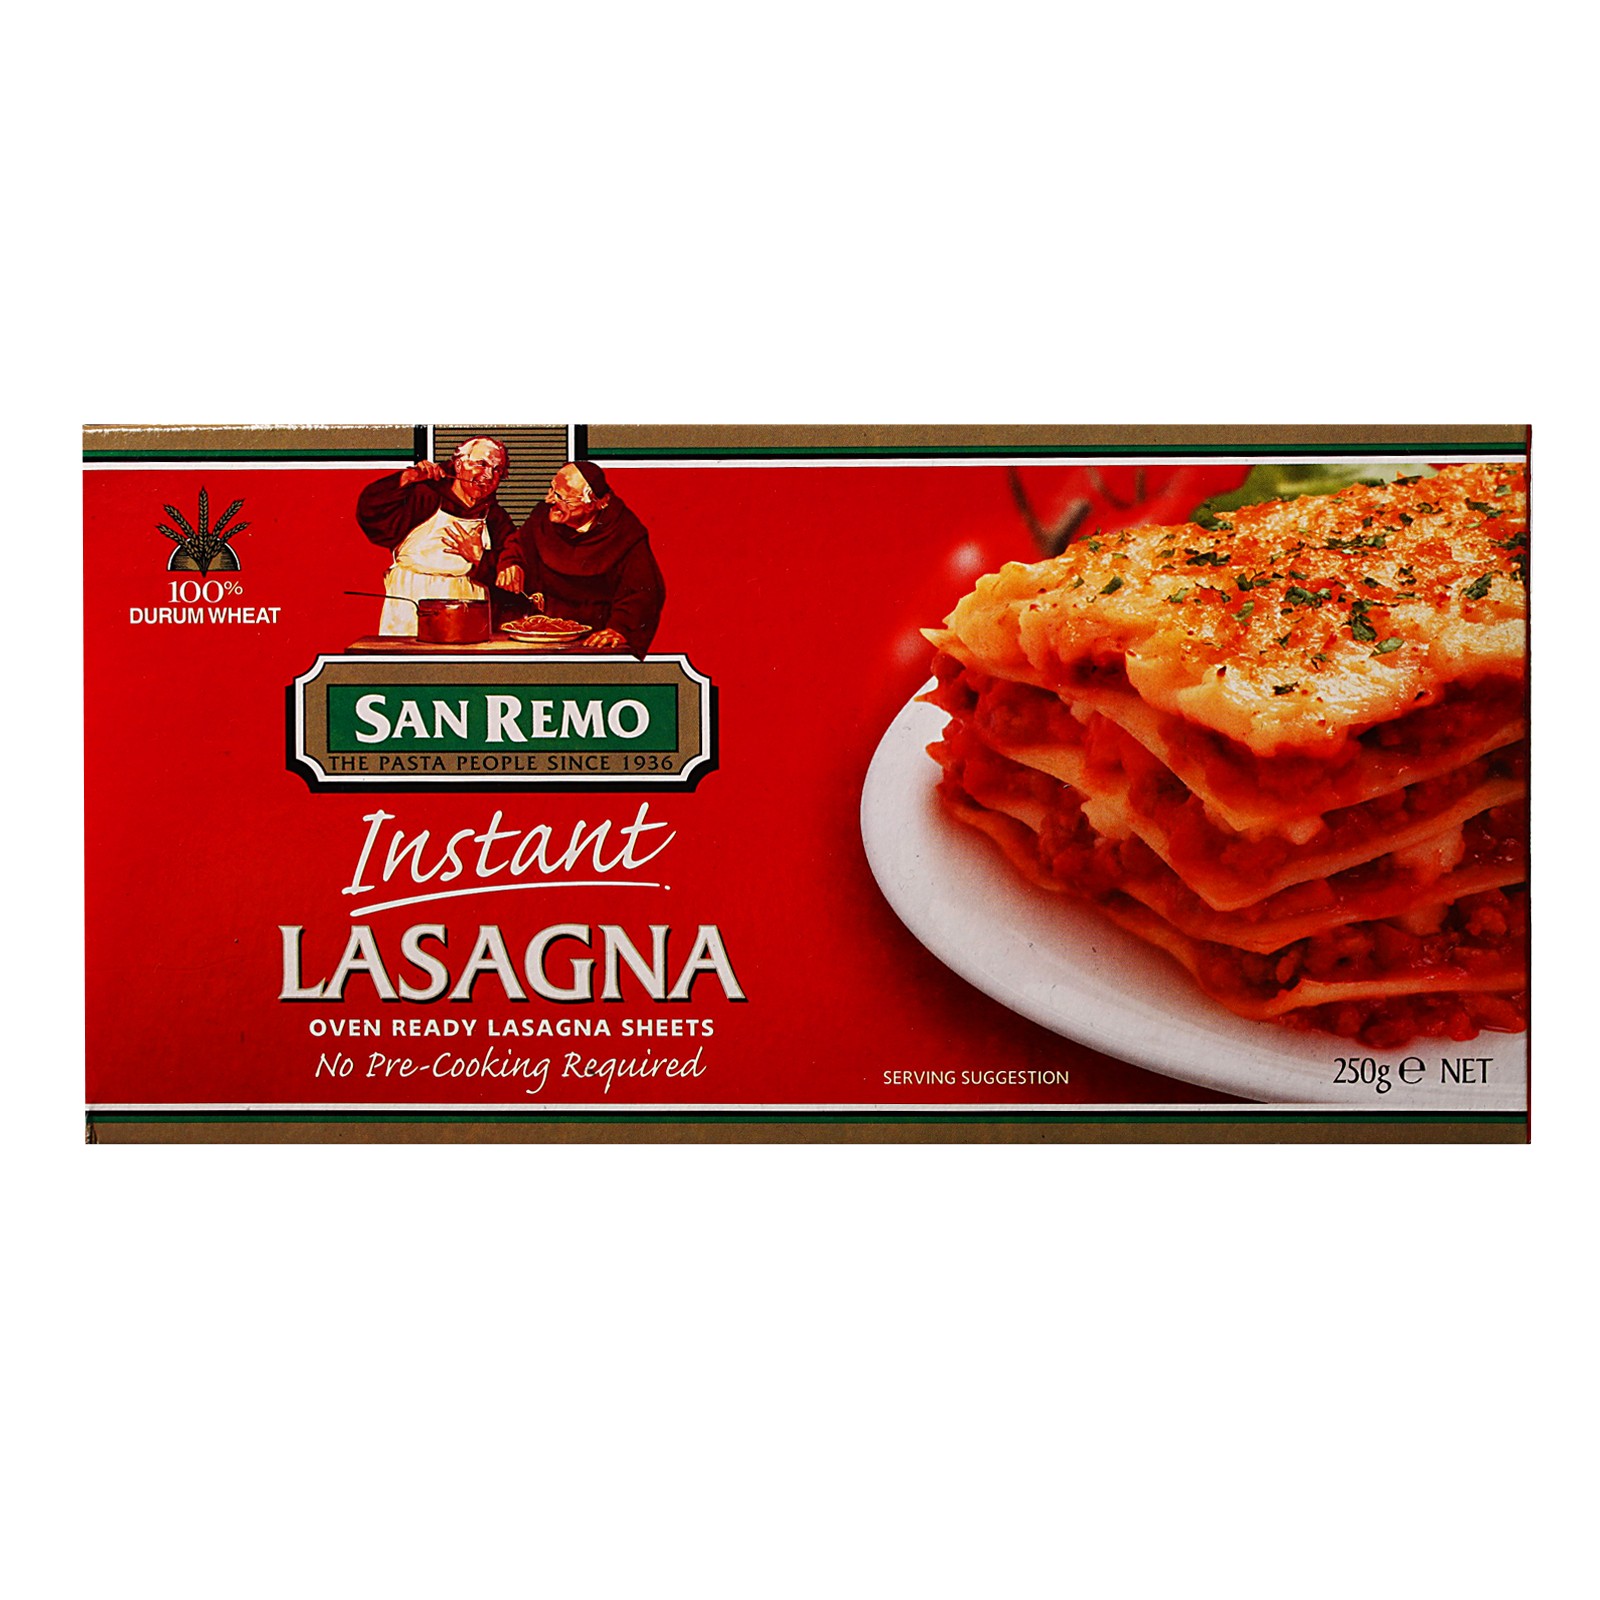 Ummi: project lasagna in the house